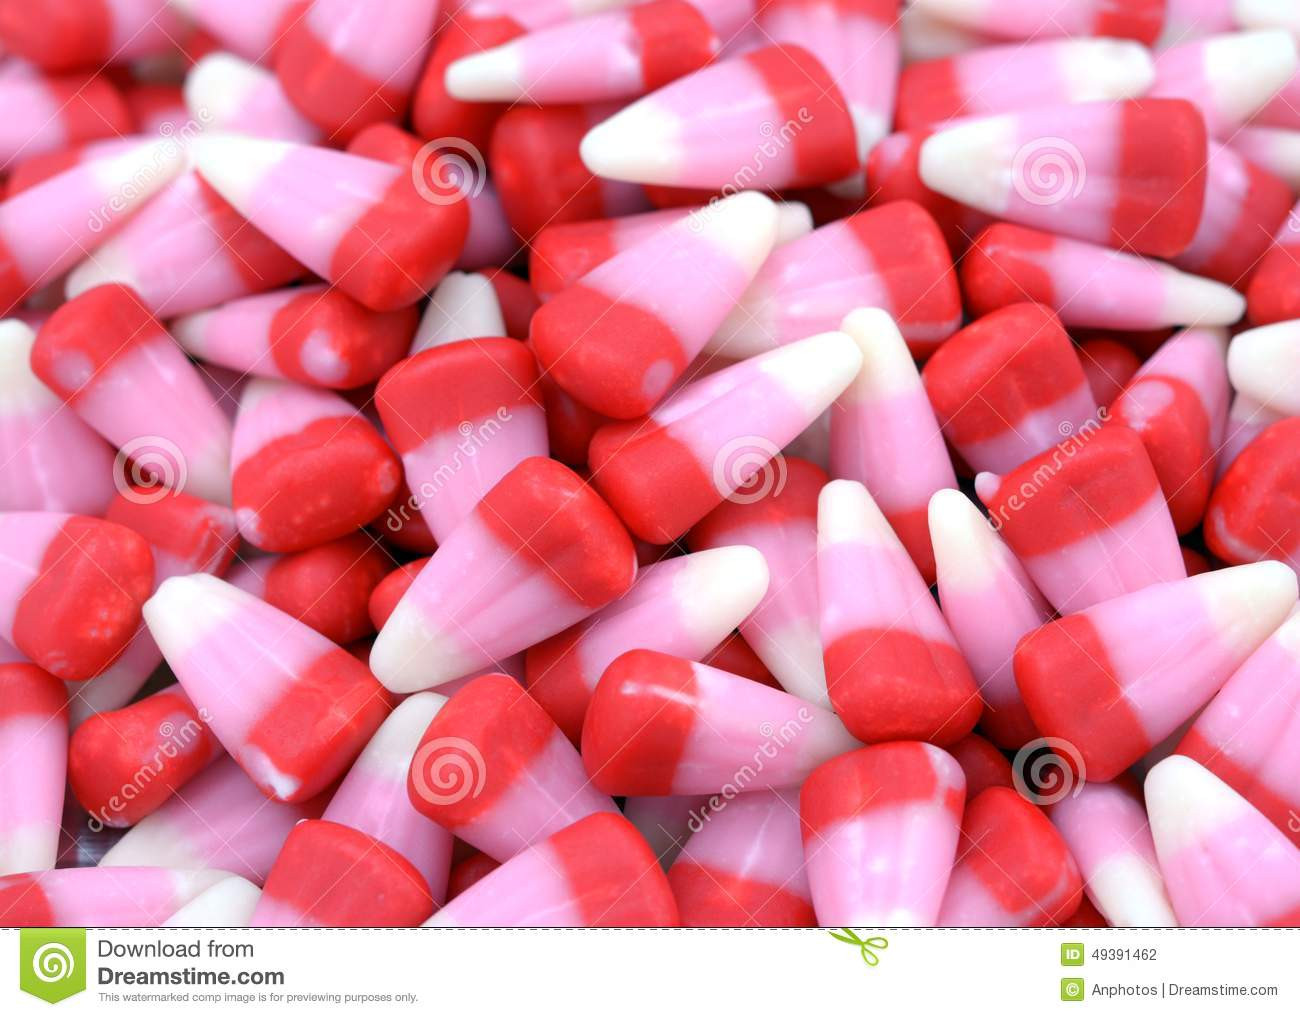 Valentines Day Candy Corn
 Candy Corn For Valentine Day Stock Image of